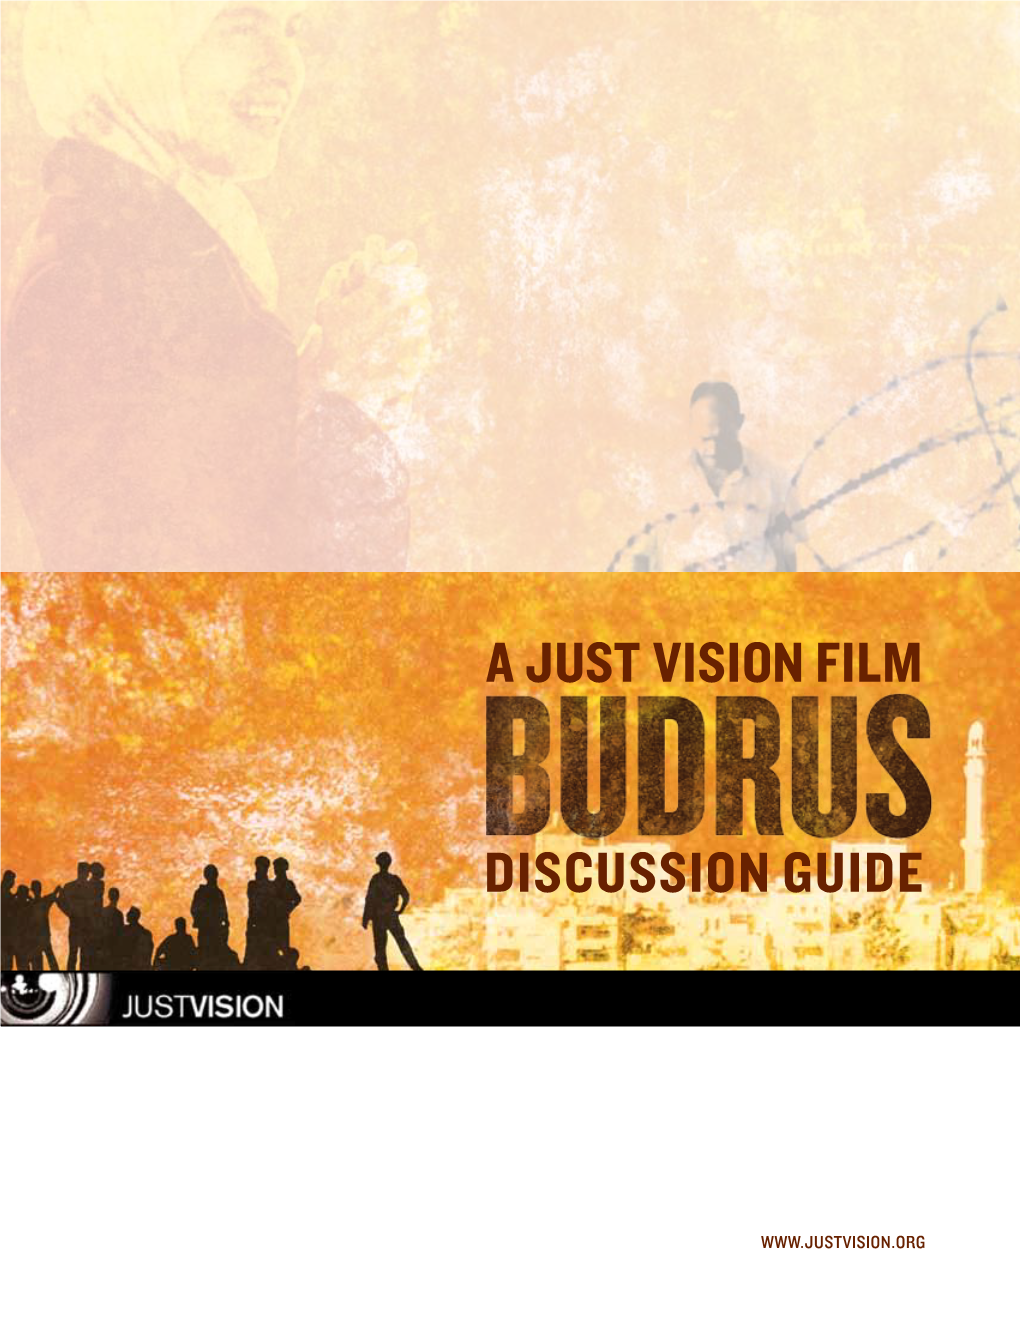 Budrus, Audiences Are Inspired by the Power of People Working Together to Create Change